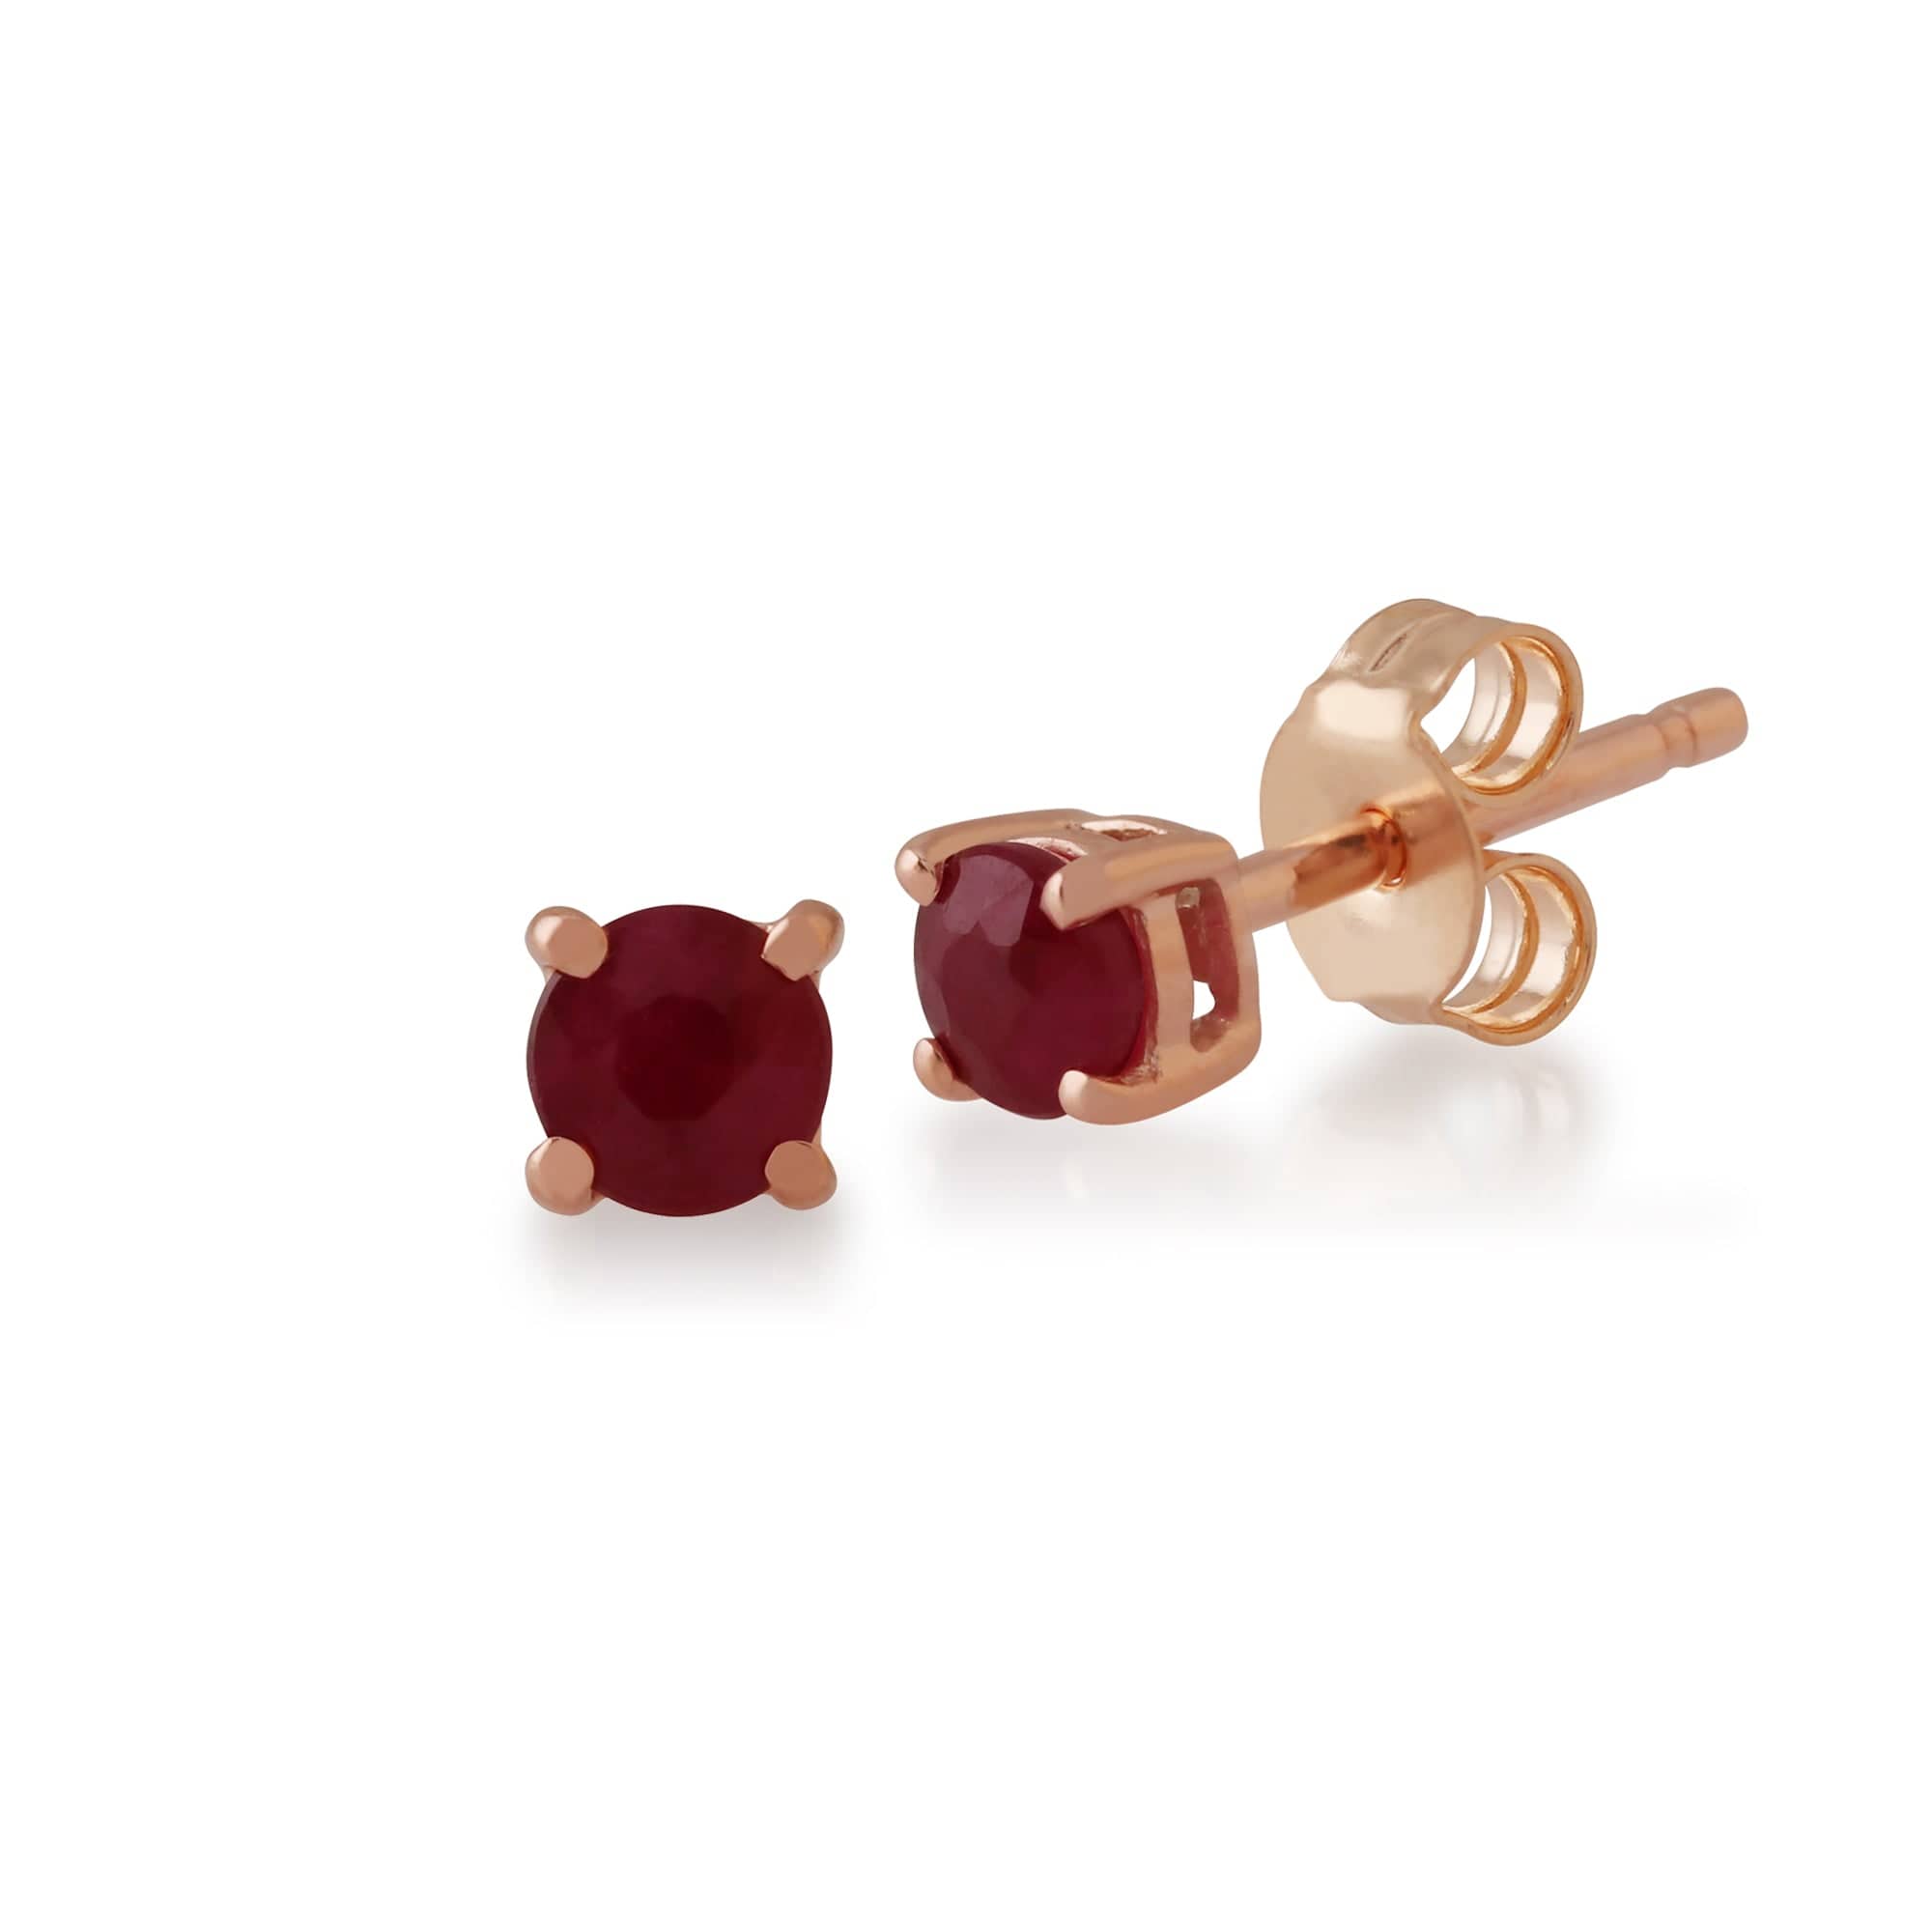 Classic Round Ruby Stud Earrings with Detachable Diamond Flower Jacket in 9ct Rose Gold - Gemondo